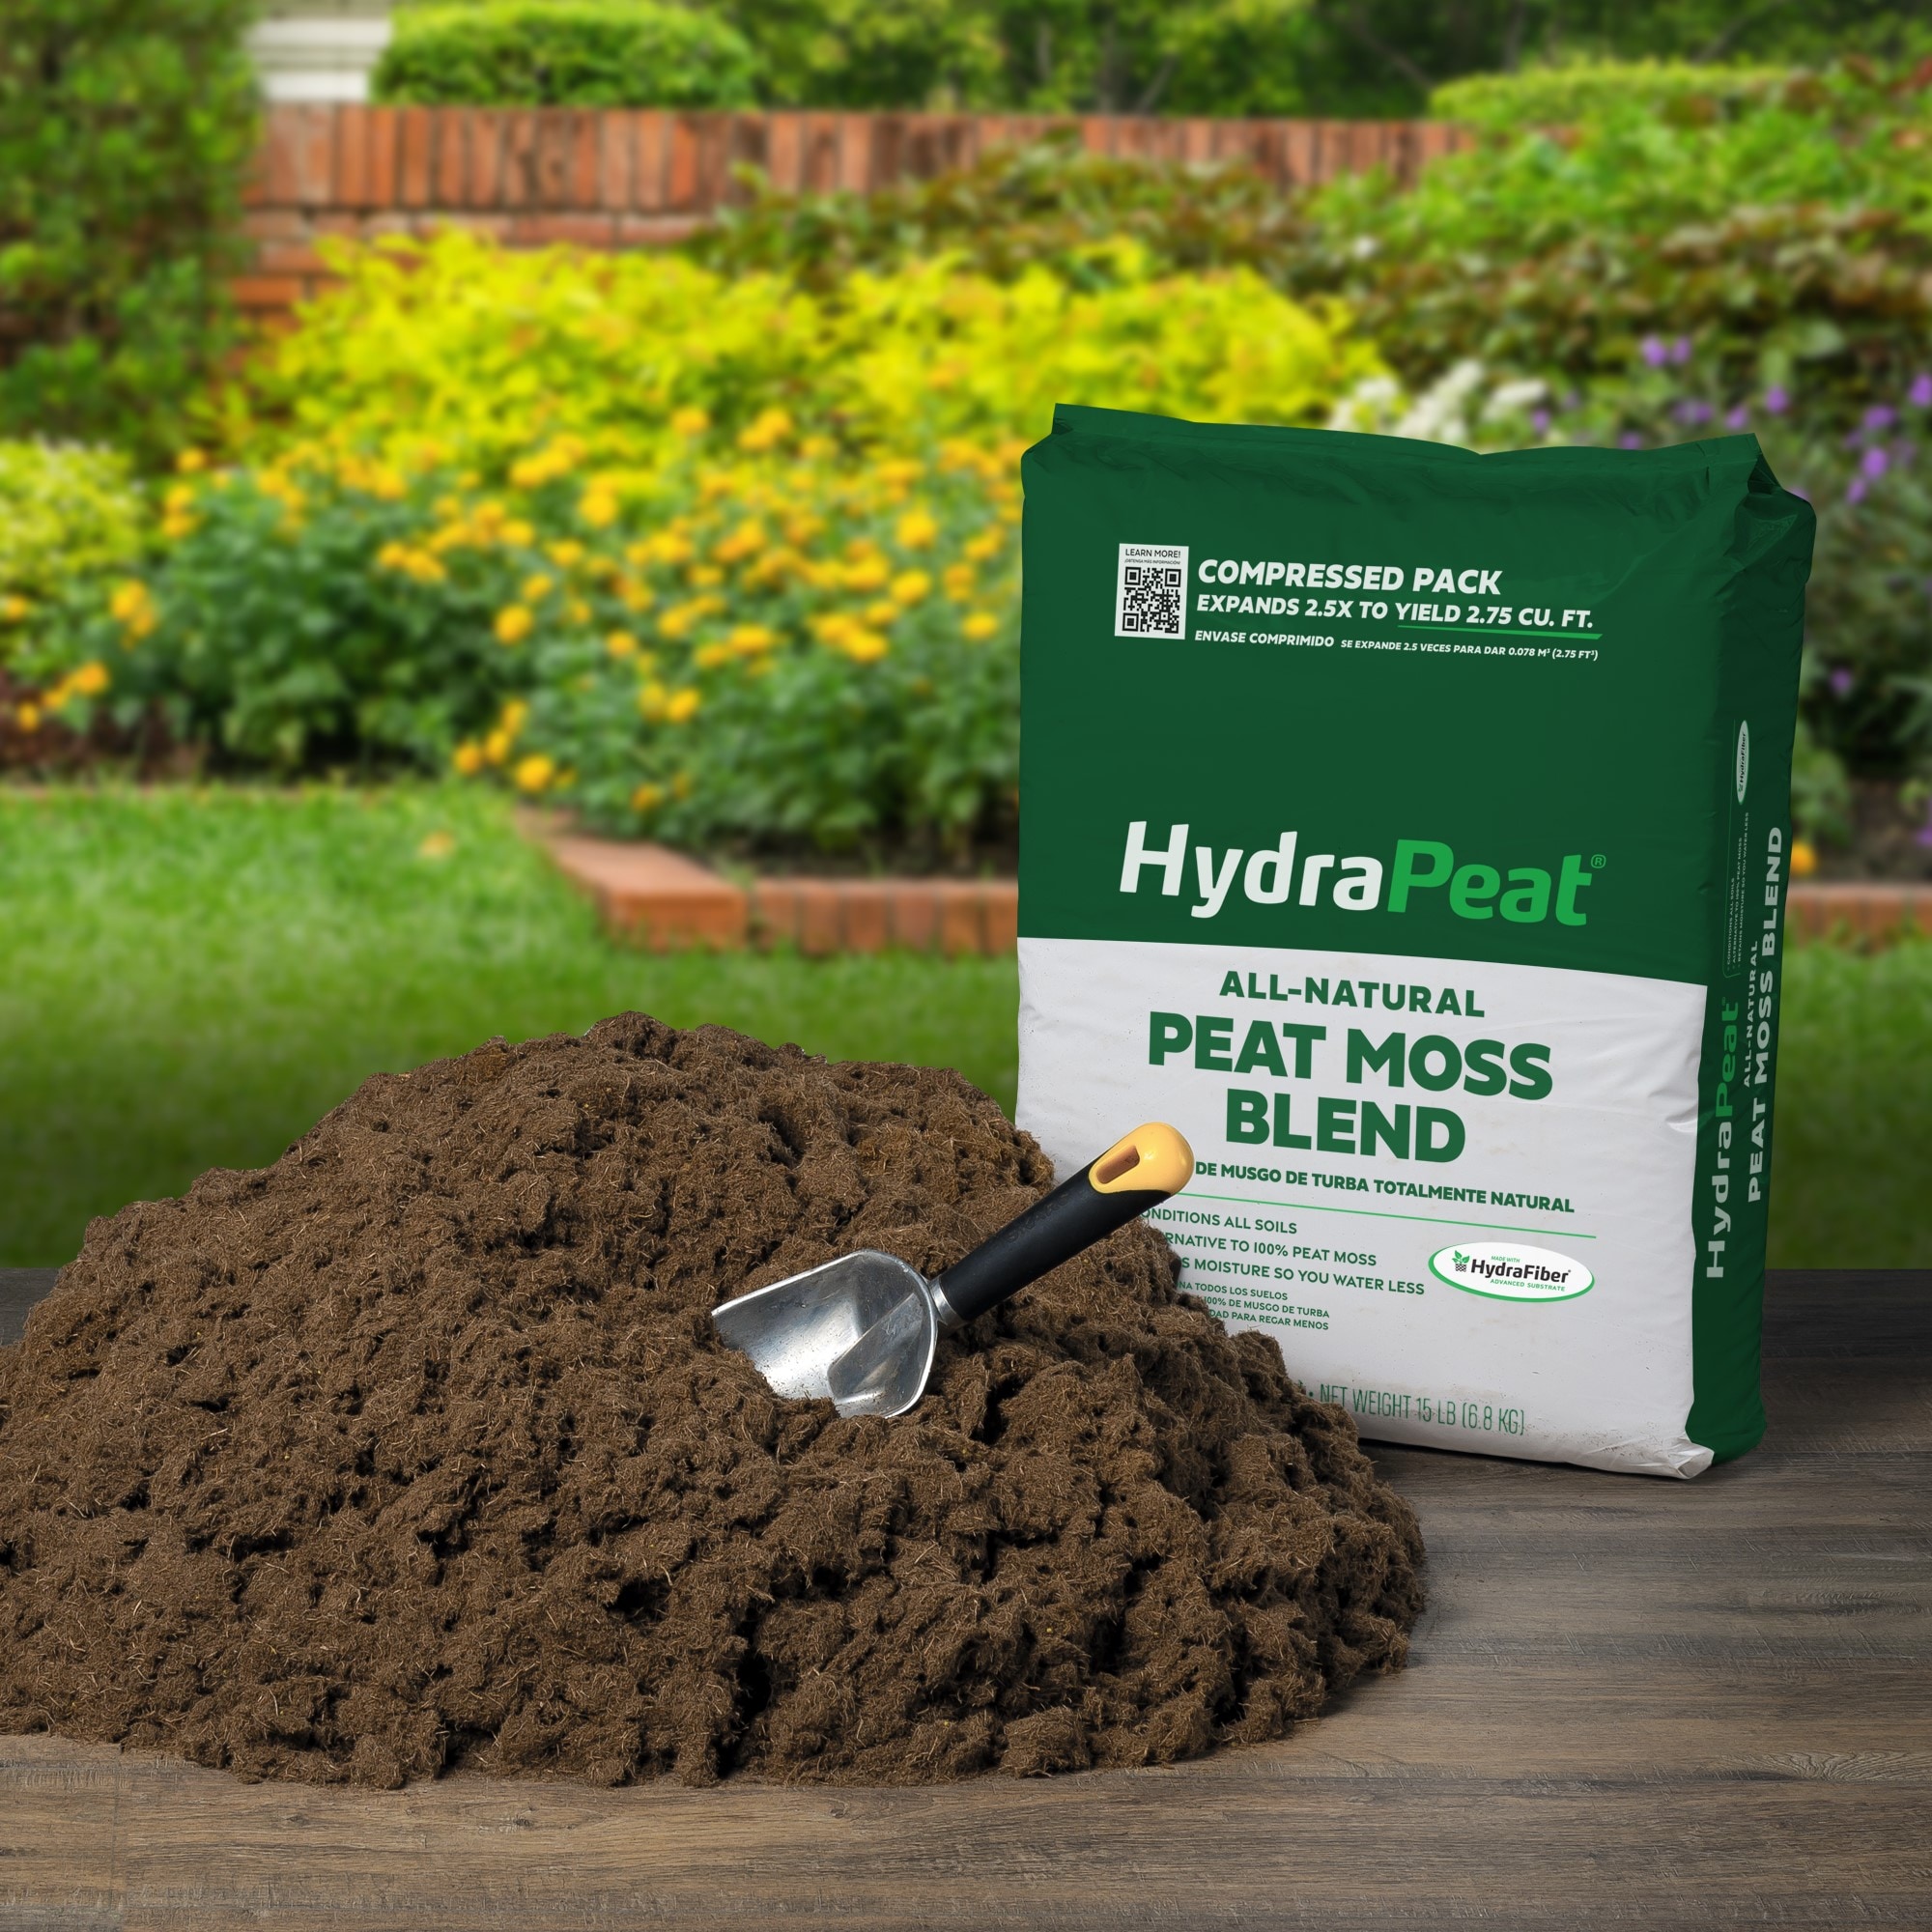 HydraPeat Peat Moss (Large) - 2.75 Cu ft of All-Natural Reduced Peat Blend Soil Media - 1.1 Compressed Pack Size